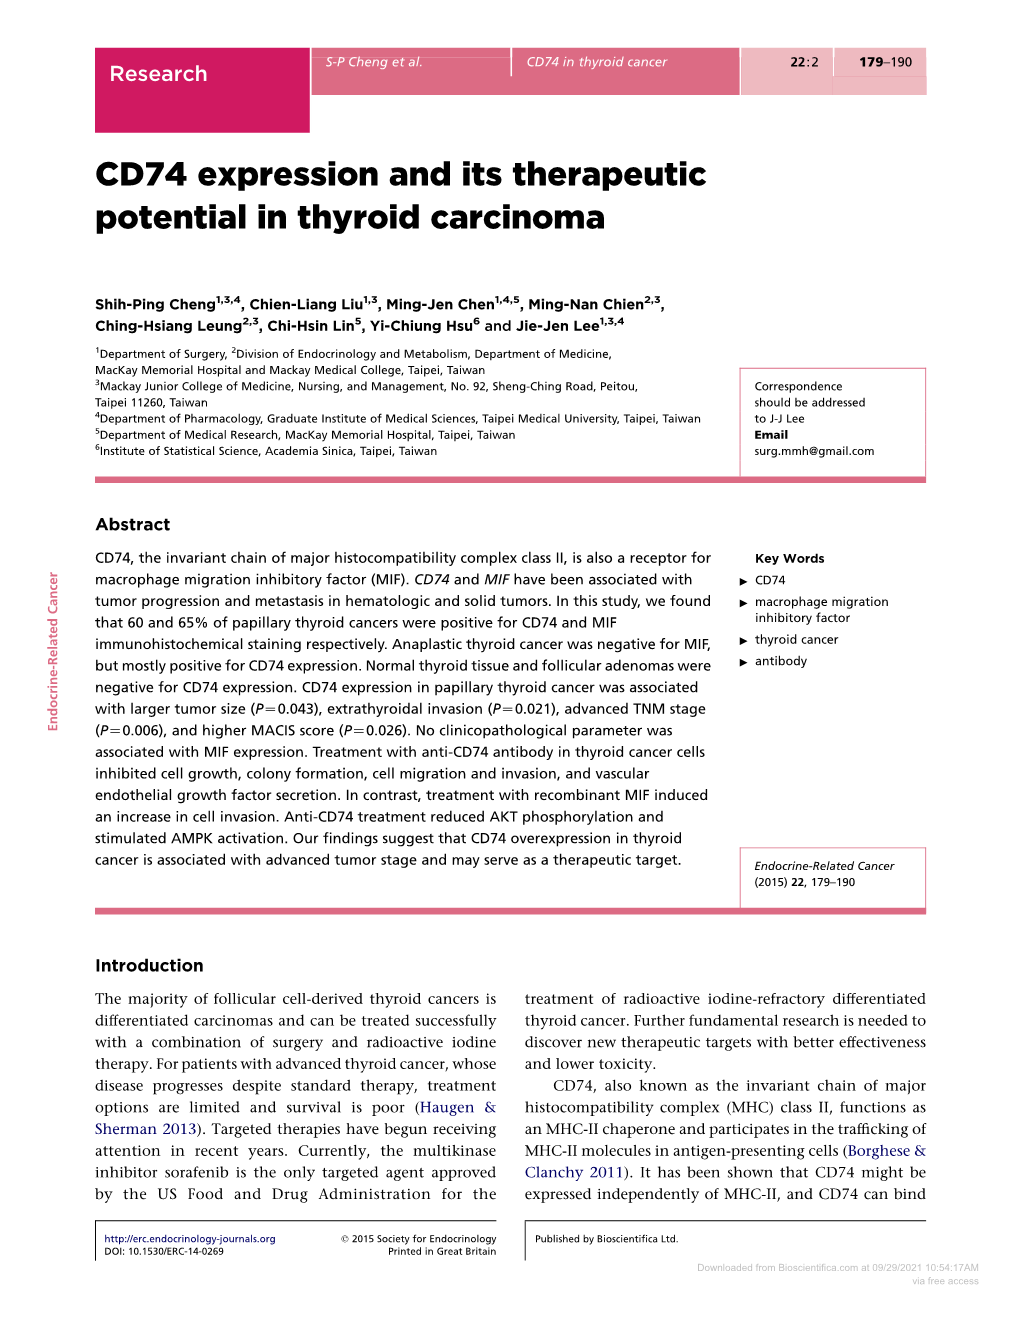 CD74 Expression and Its Therapeutic Potential in Thyroid Carcinoma